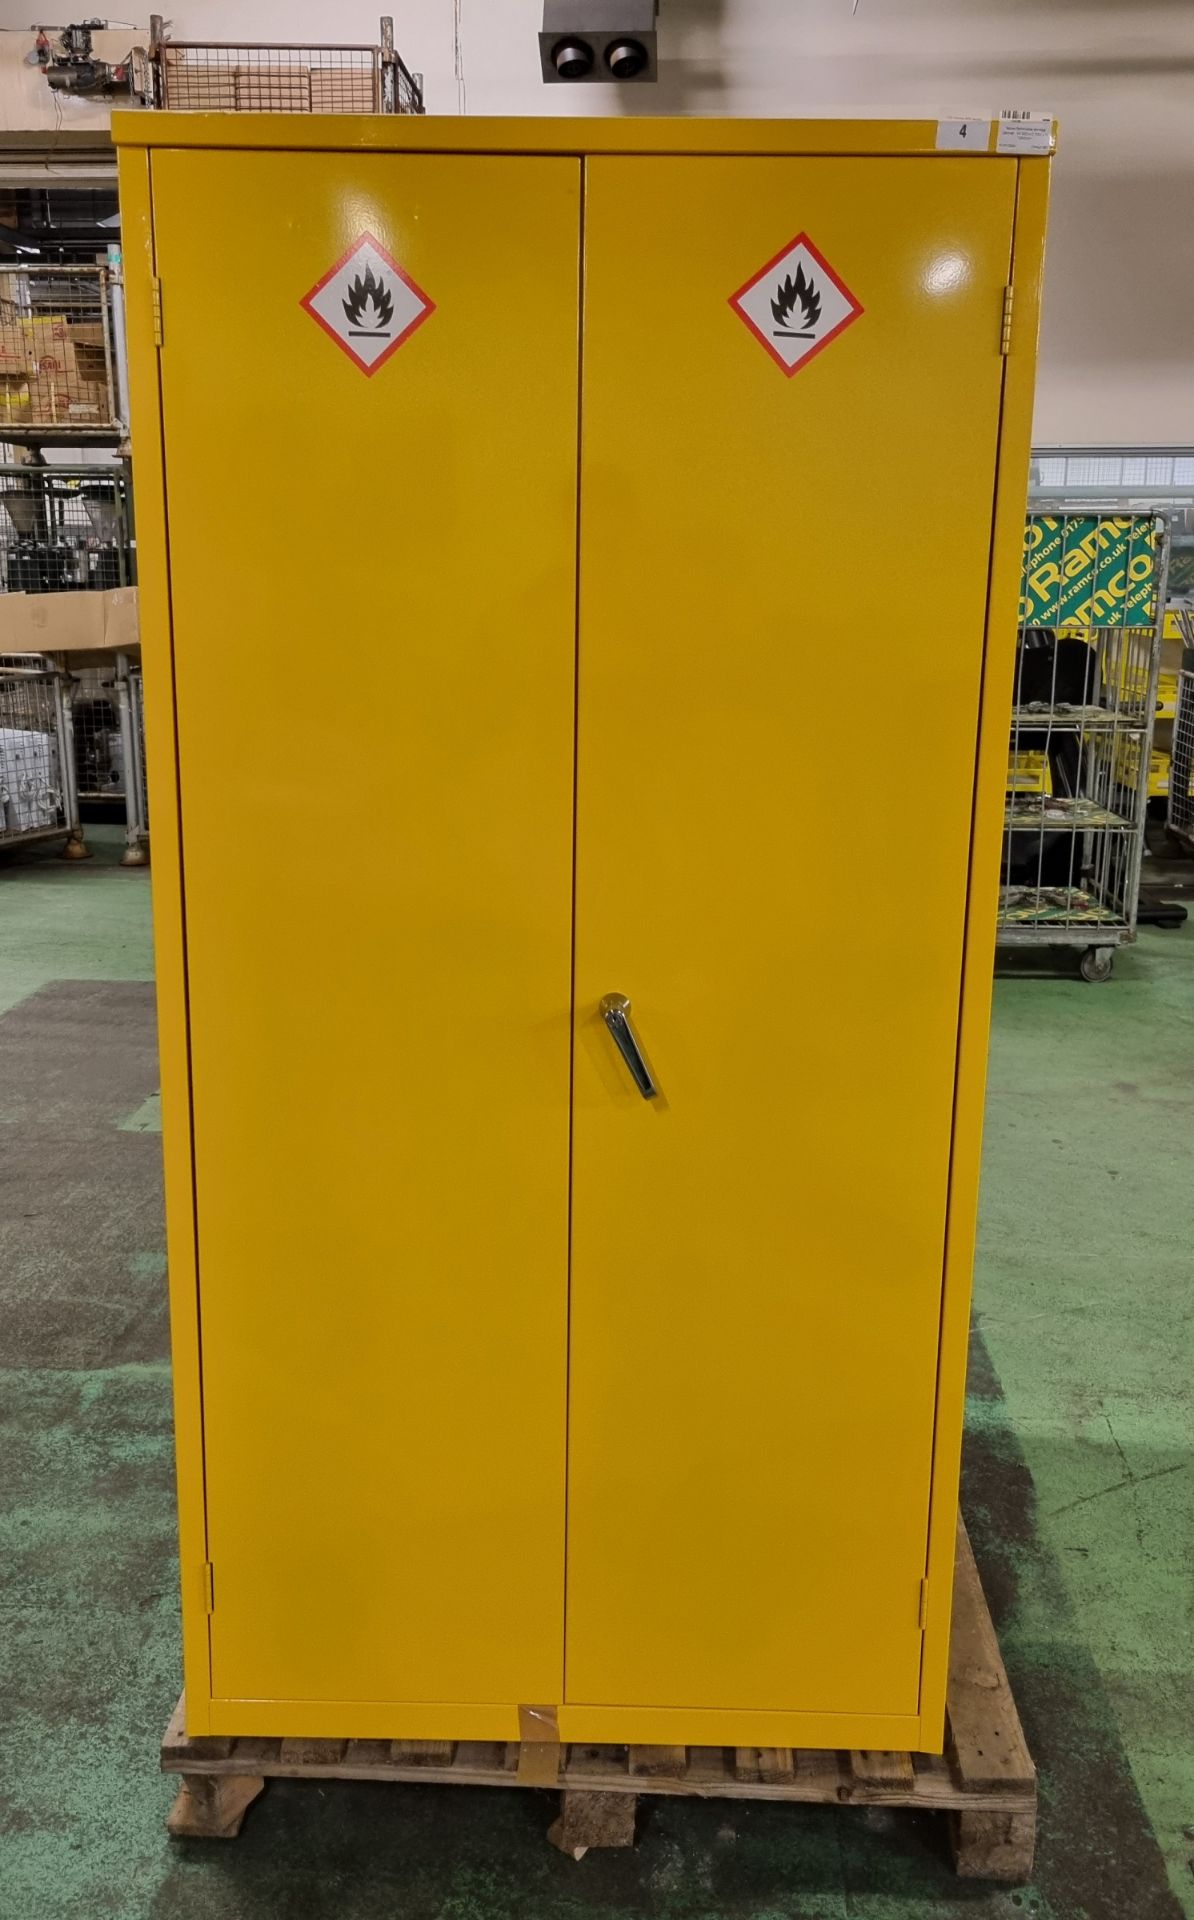 Yellow flammable storage cabinet - no key - W 920 x D 500 x H 1820mm